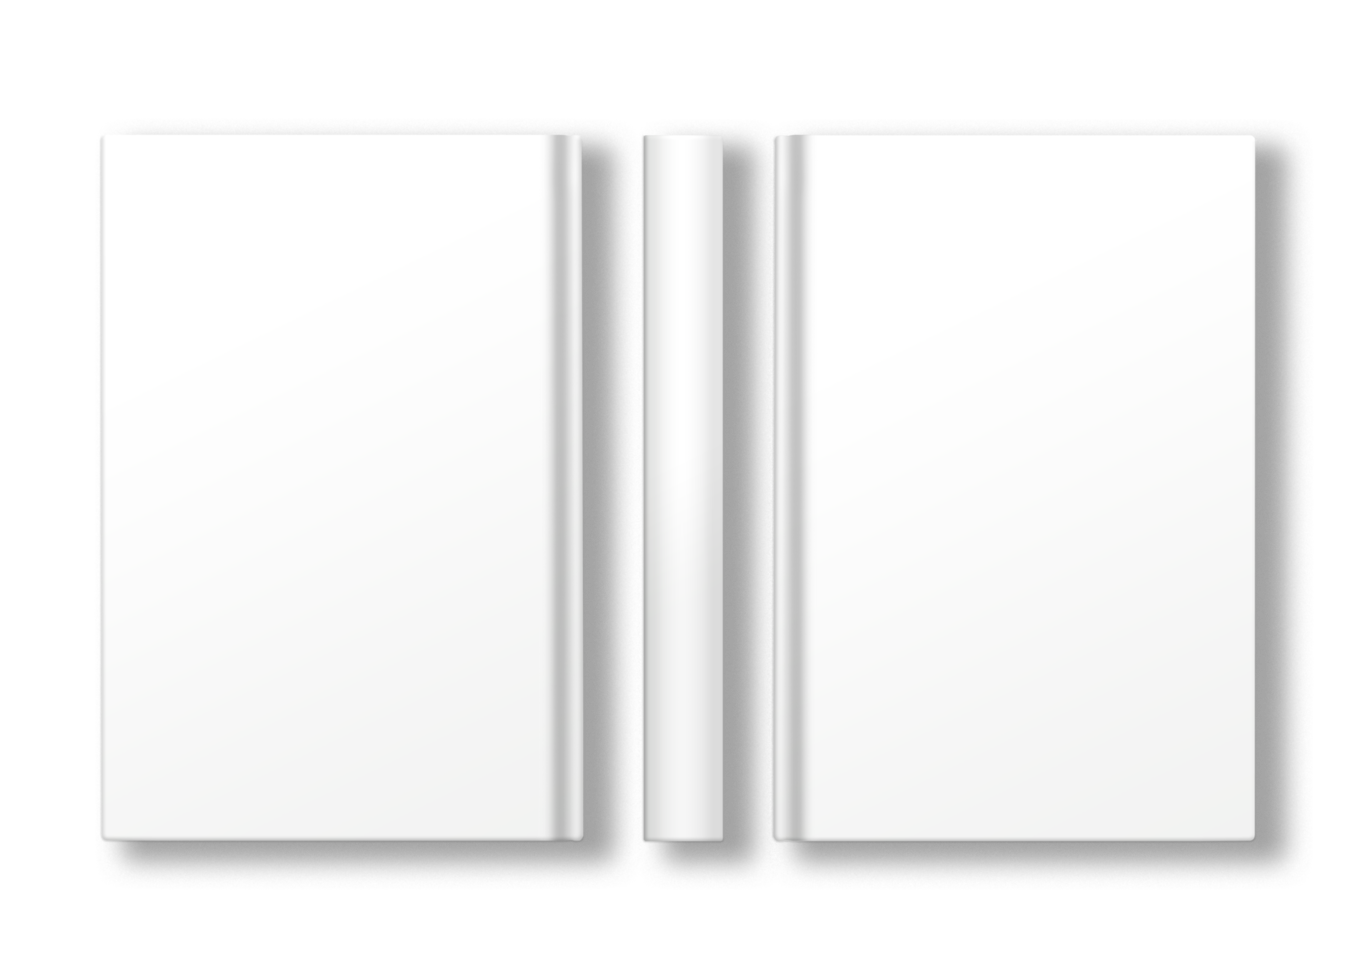 Isolated three views of a white book png